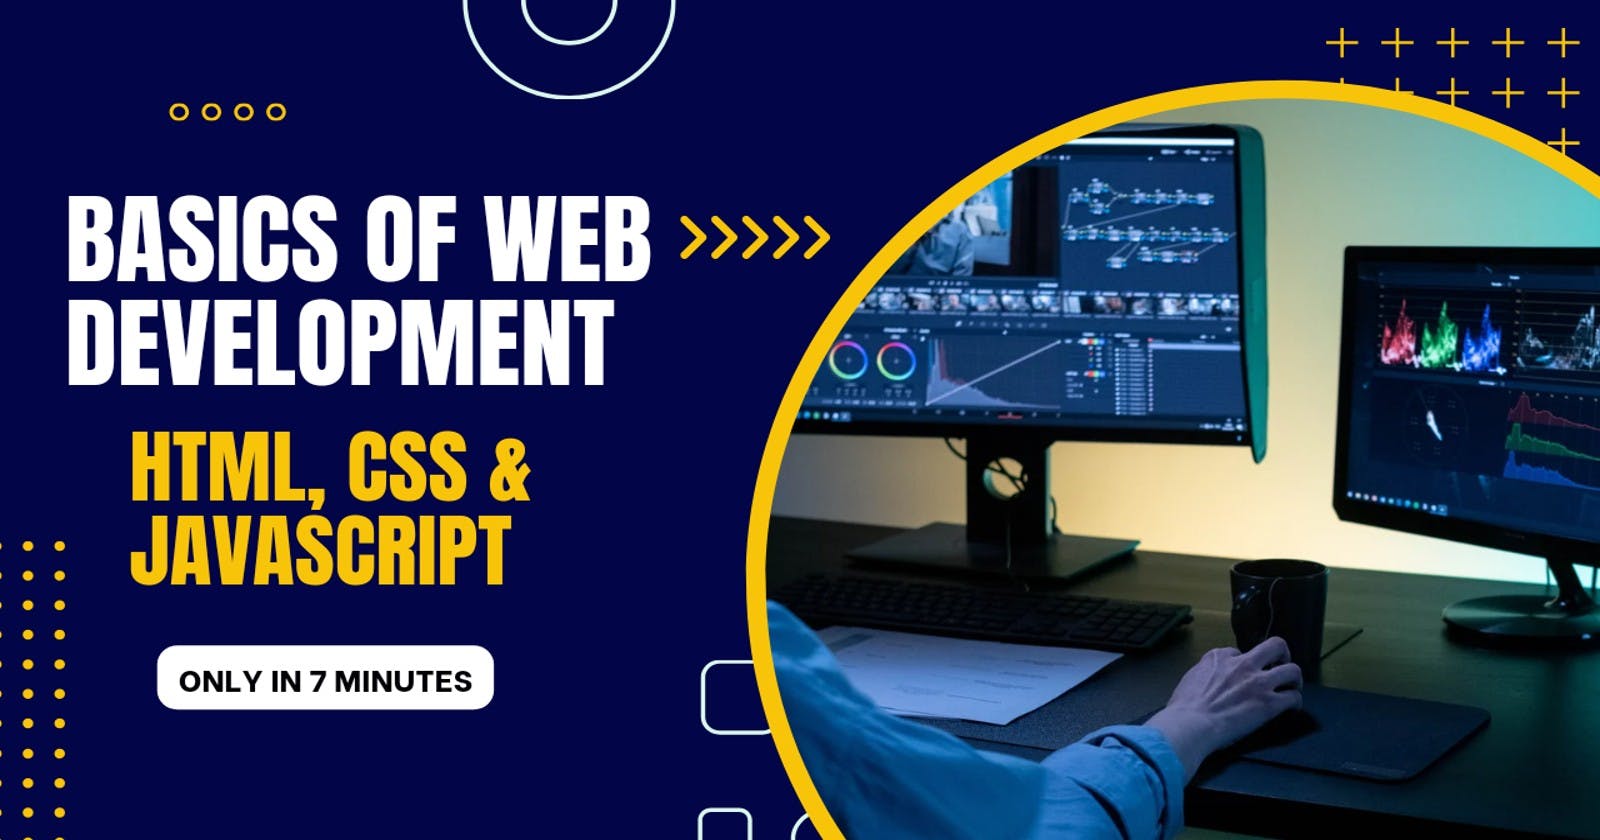 The Basics of Web Development: A Practical Guide for Beginners